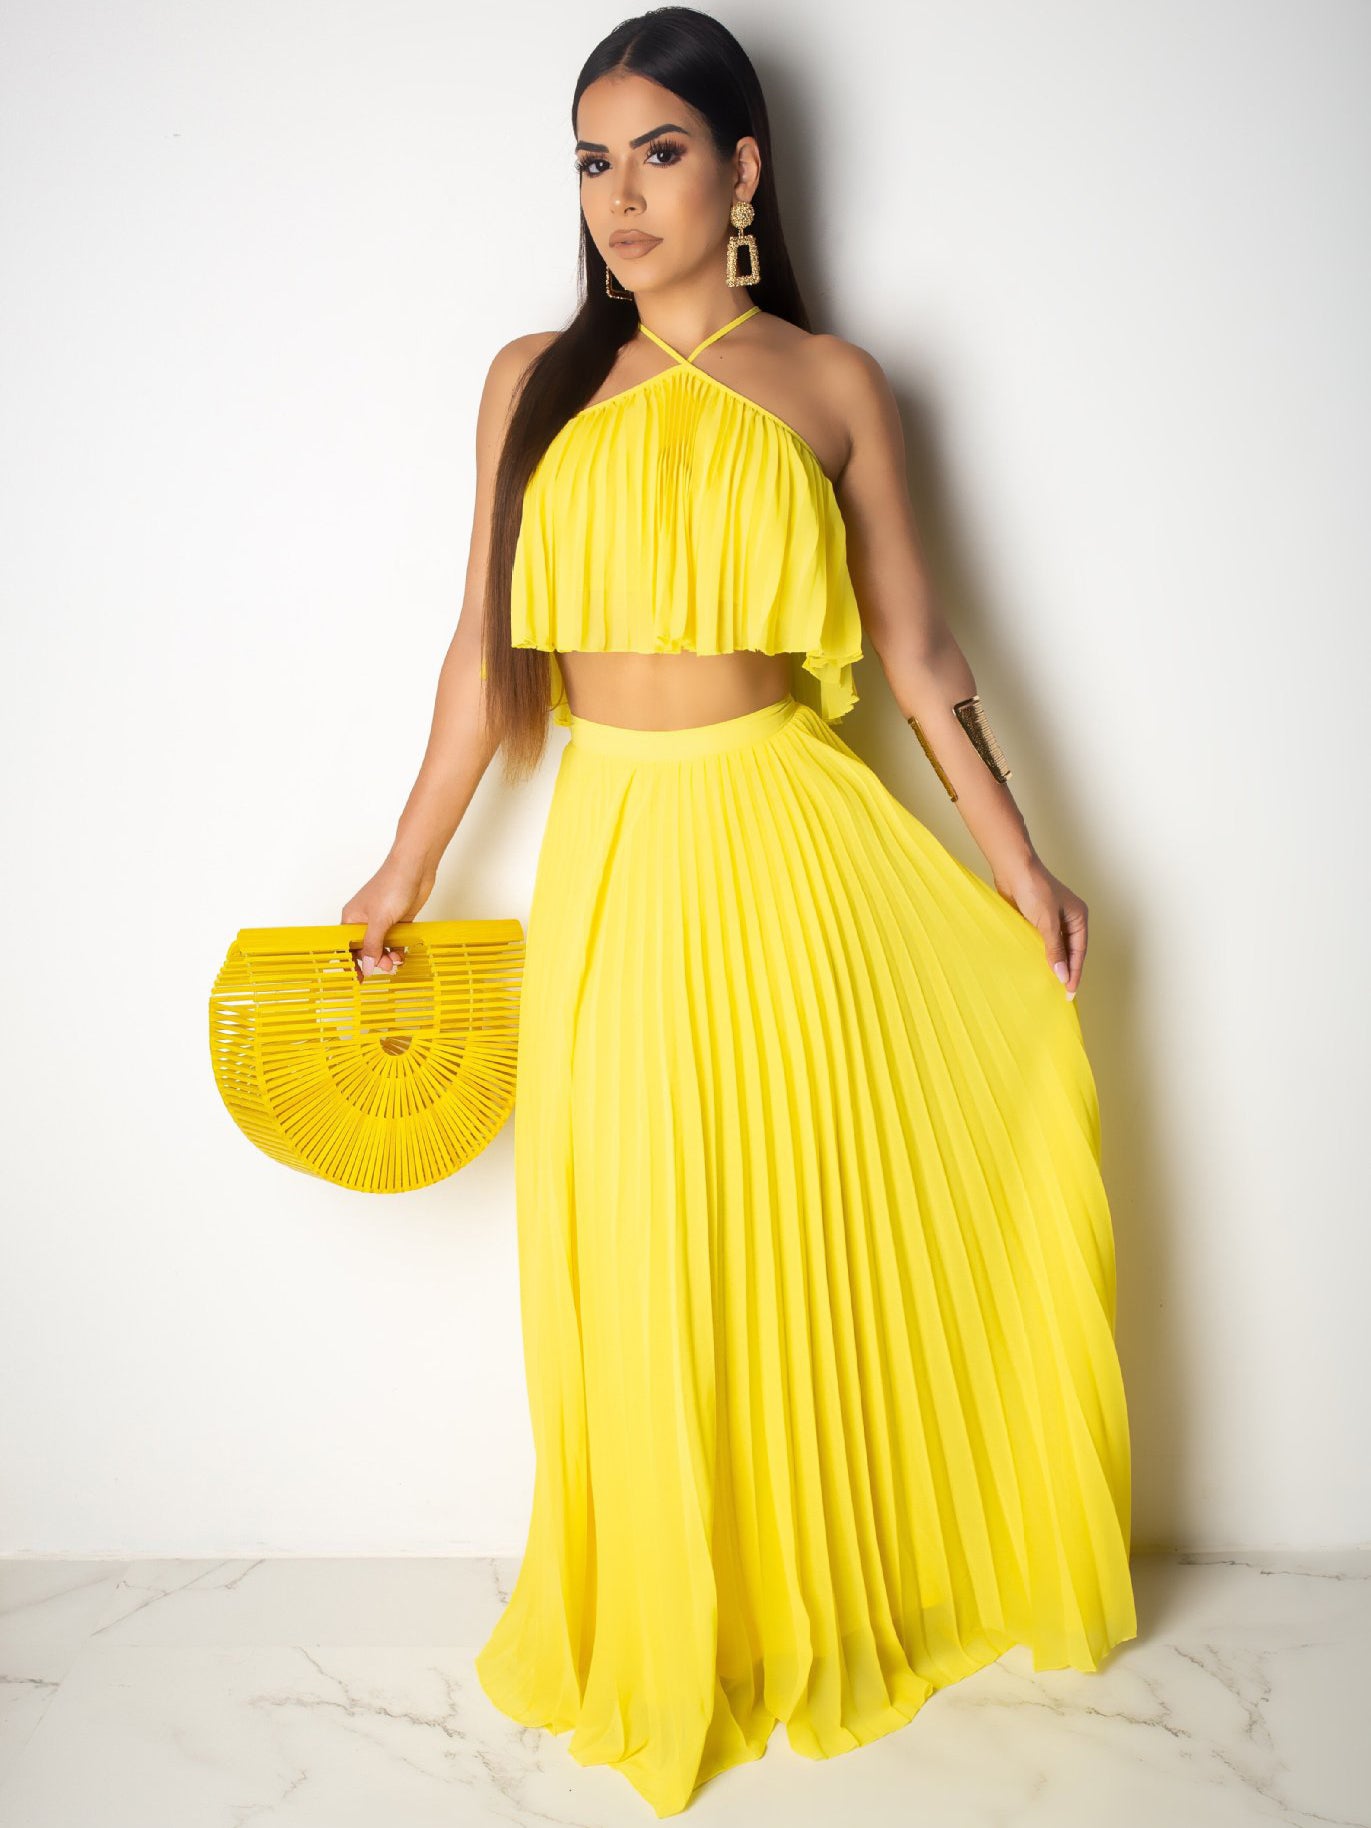 Euro Solid Color Pleated 2 Pieces Maxi Skirt Sets